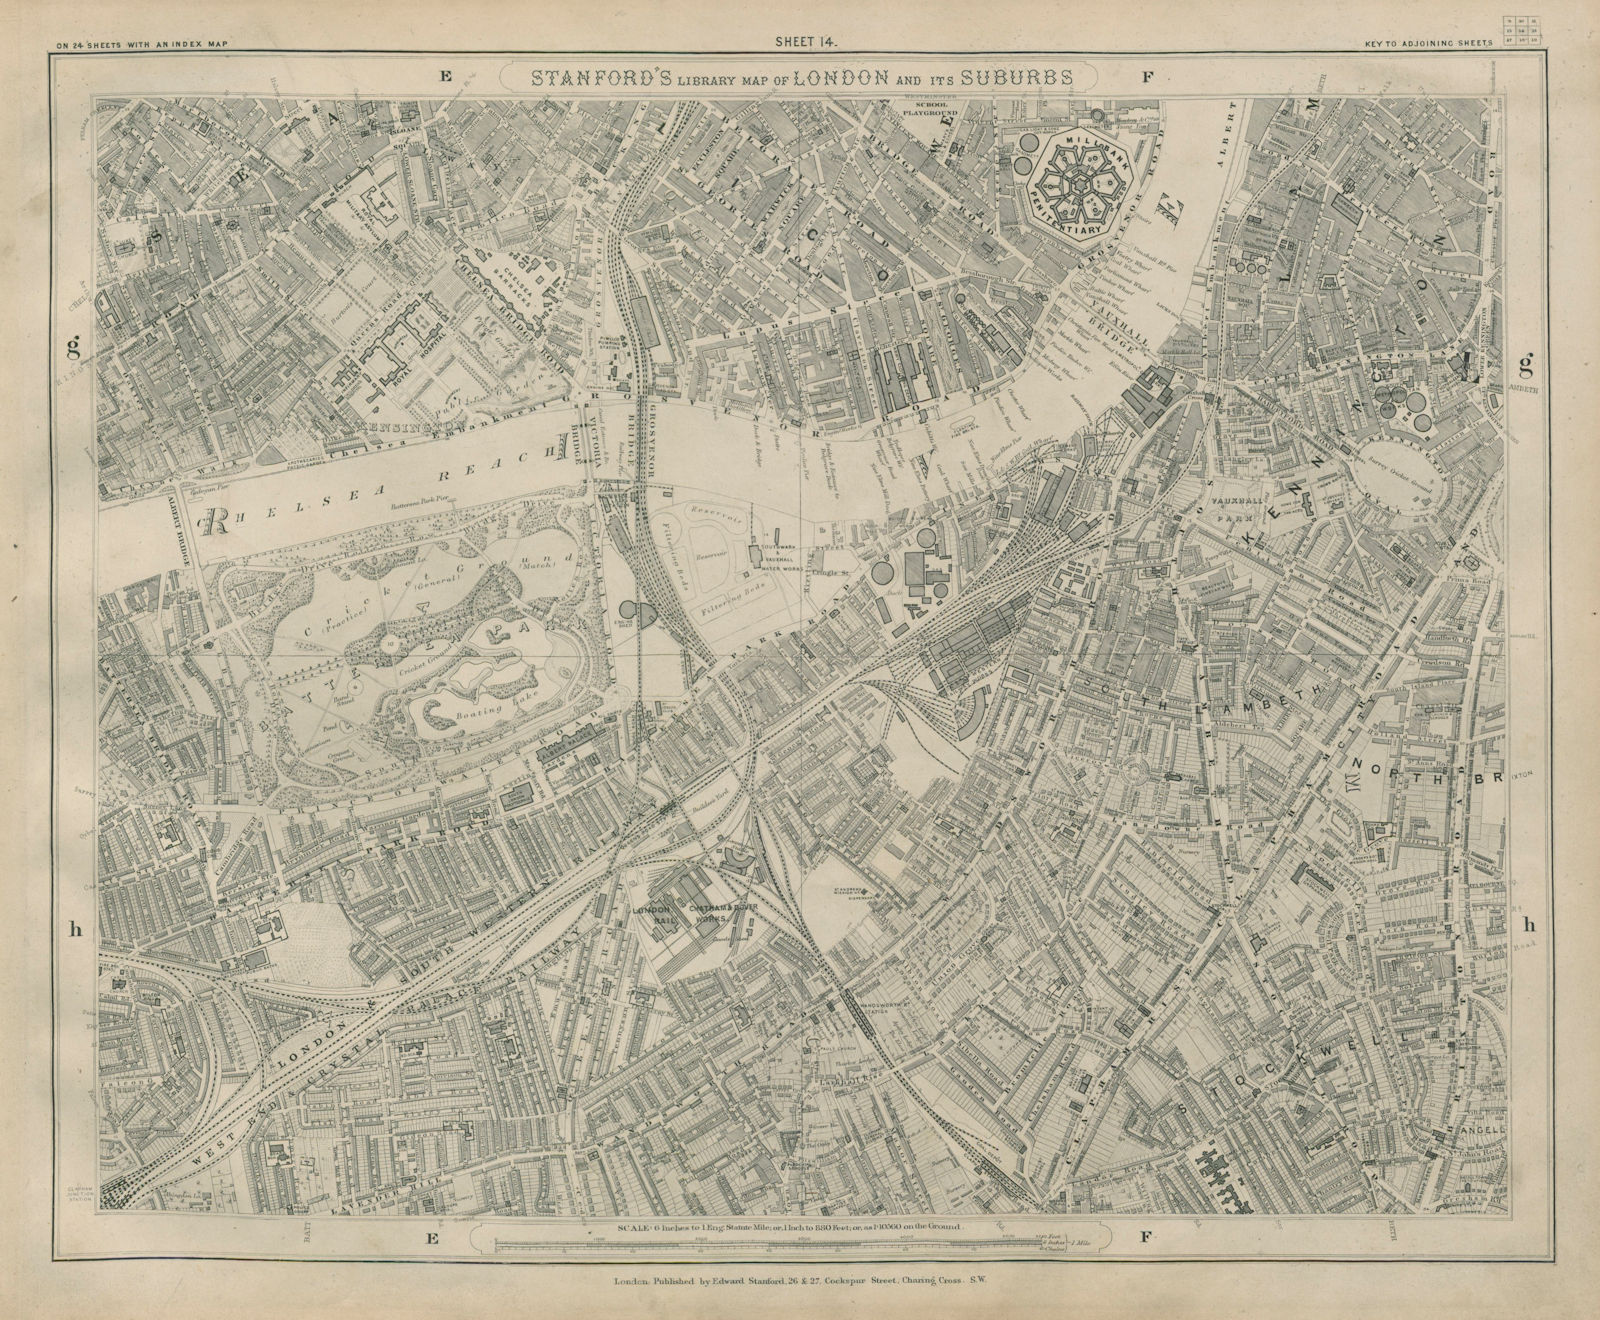 Associate Product Stanford Library map of London Sheet 14 Chelsea Battersea Pimlico Vauxhall 1895